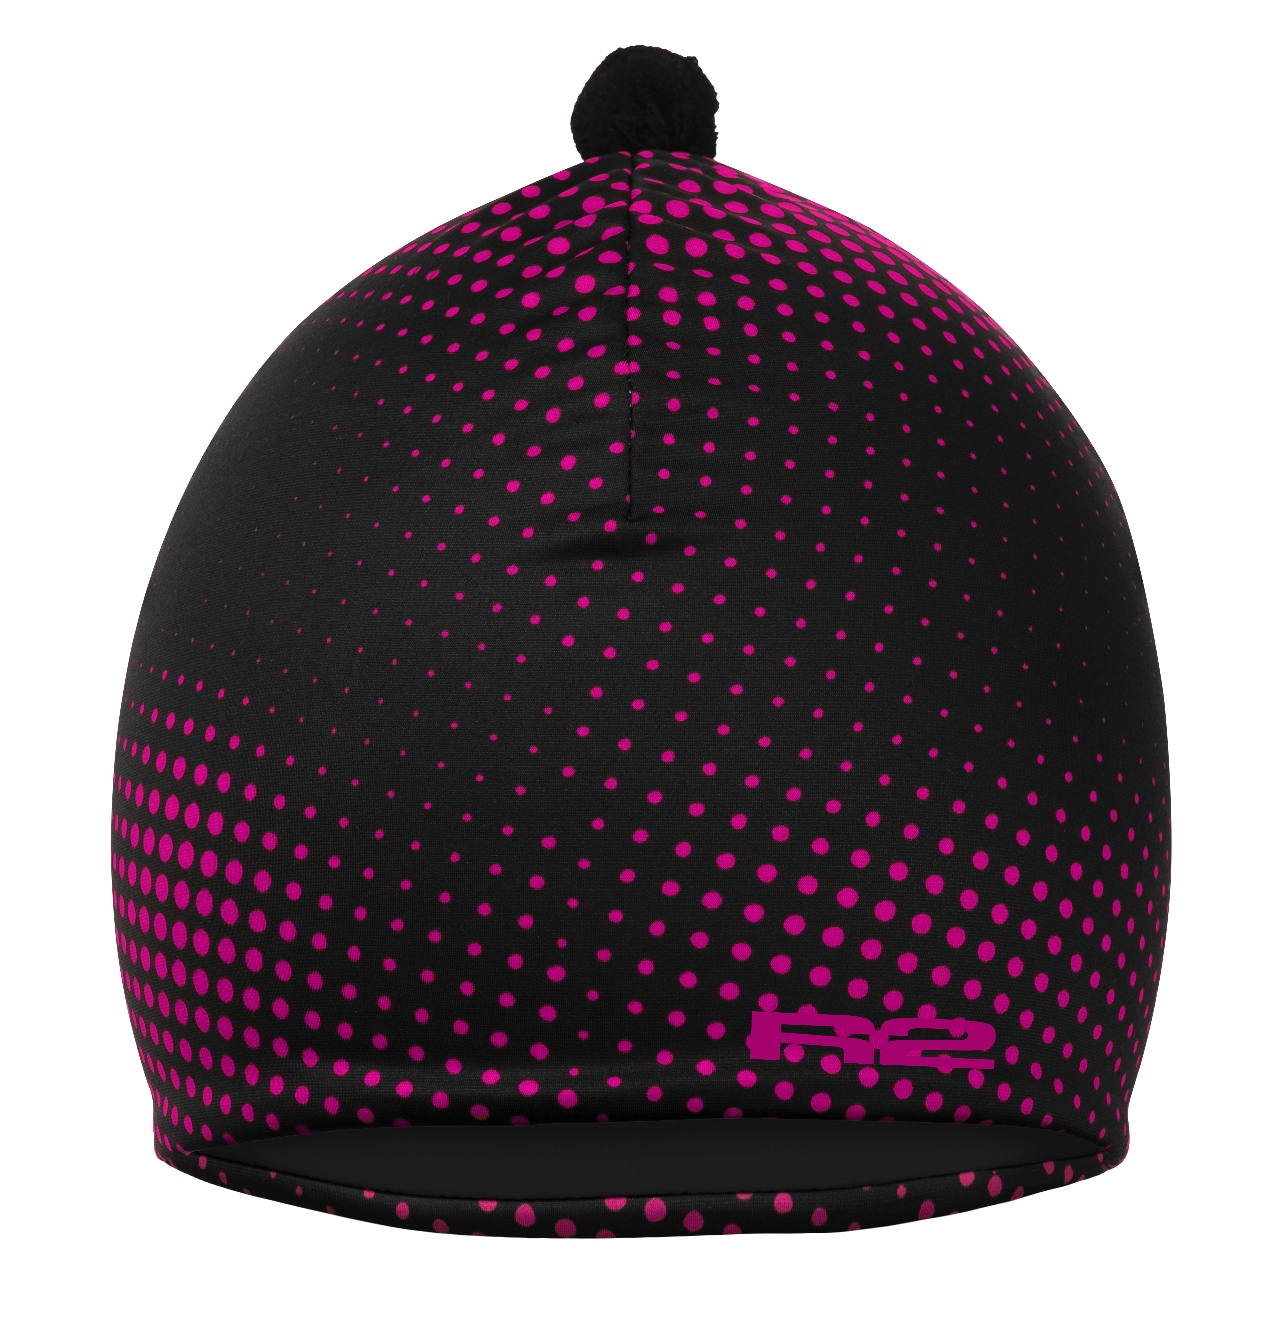 SPORTS FUNCTIONAL HAT R2 POINT  ATK11A M